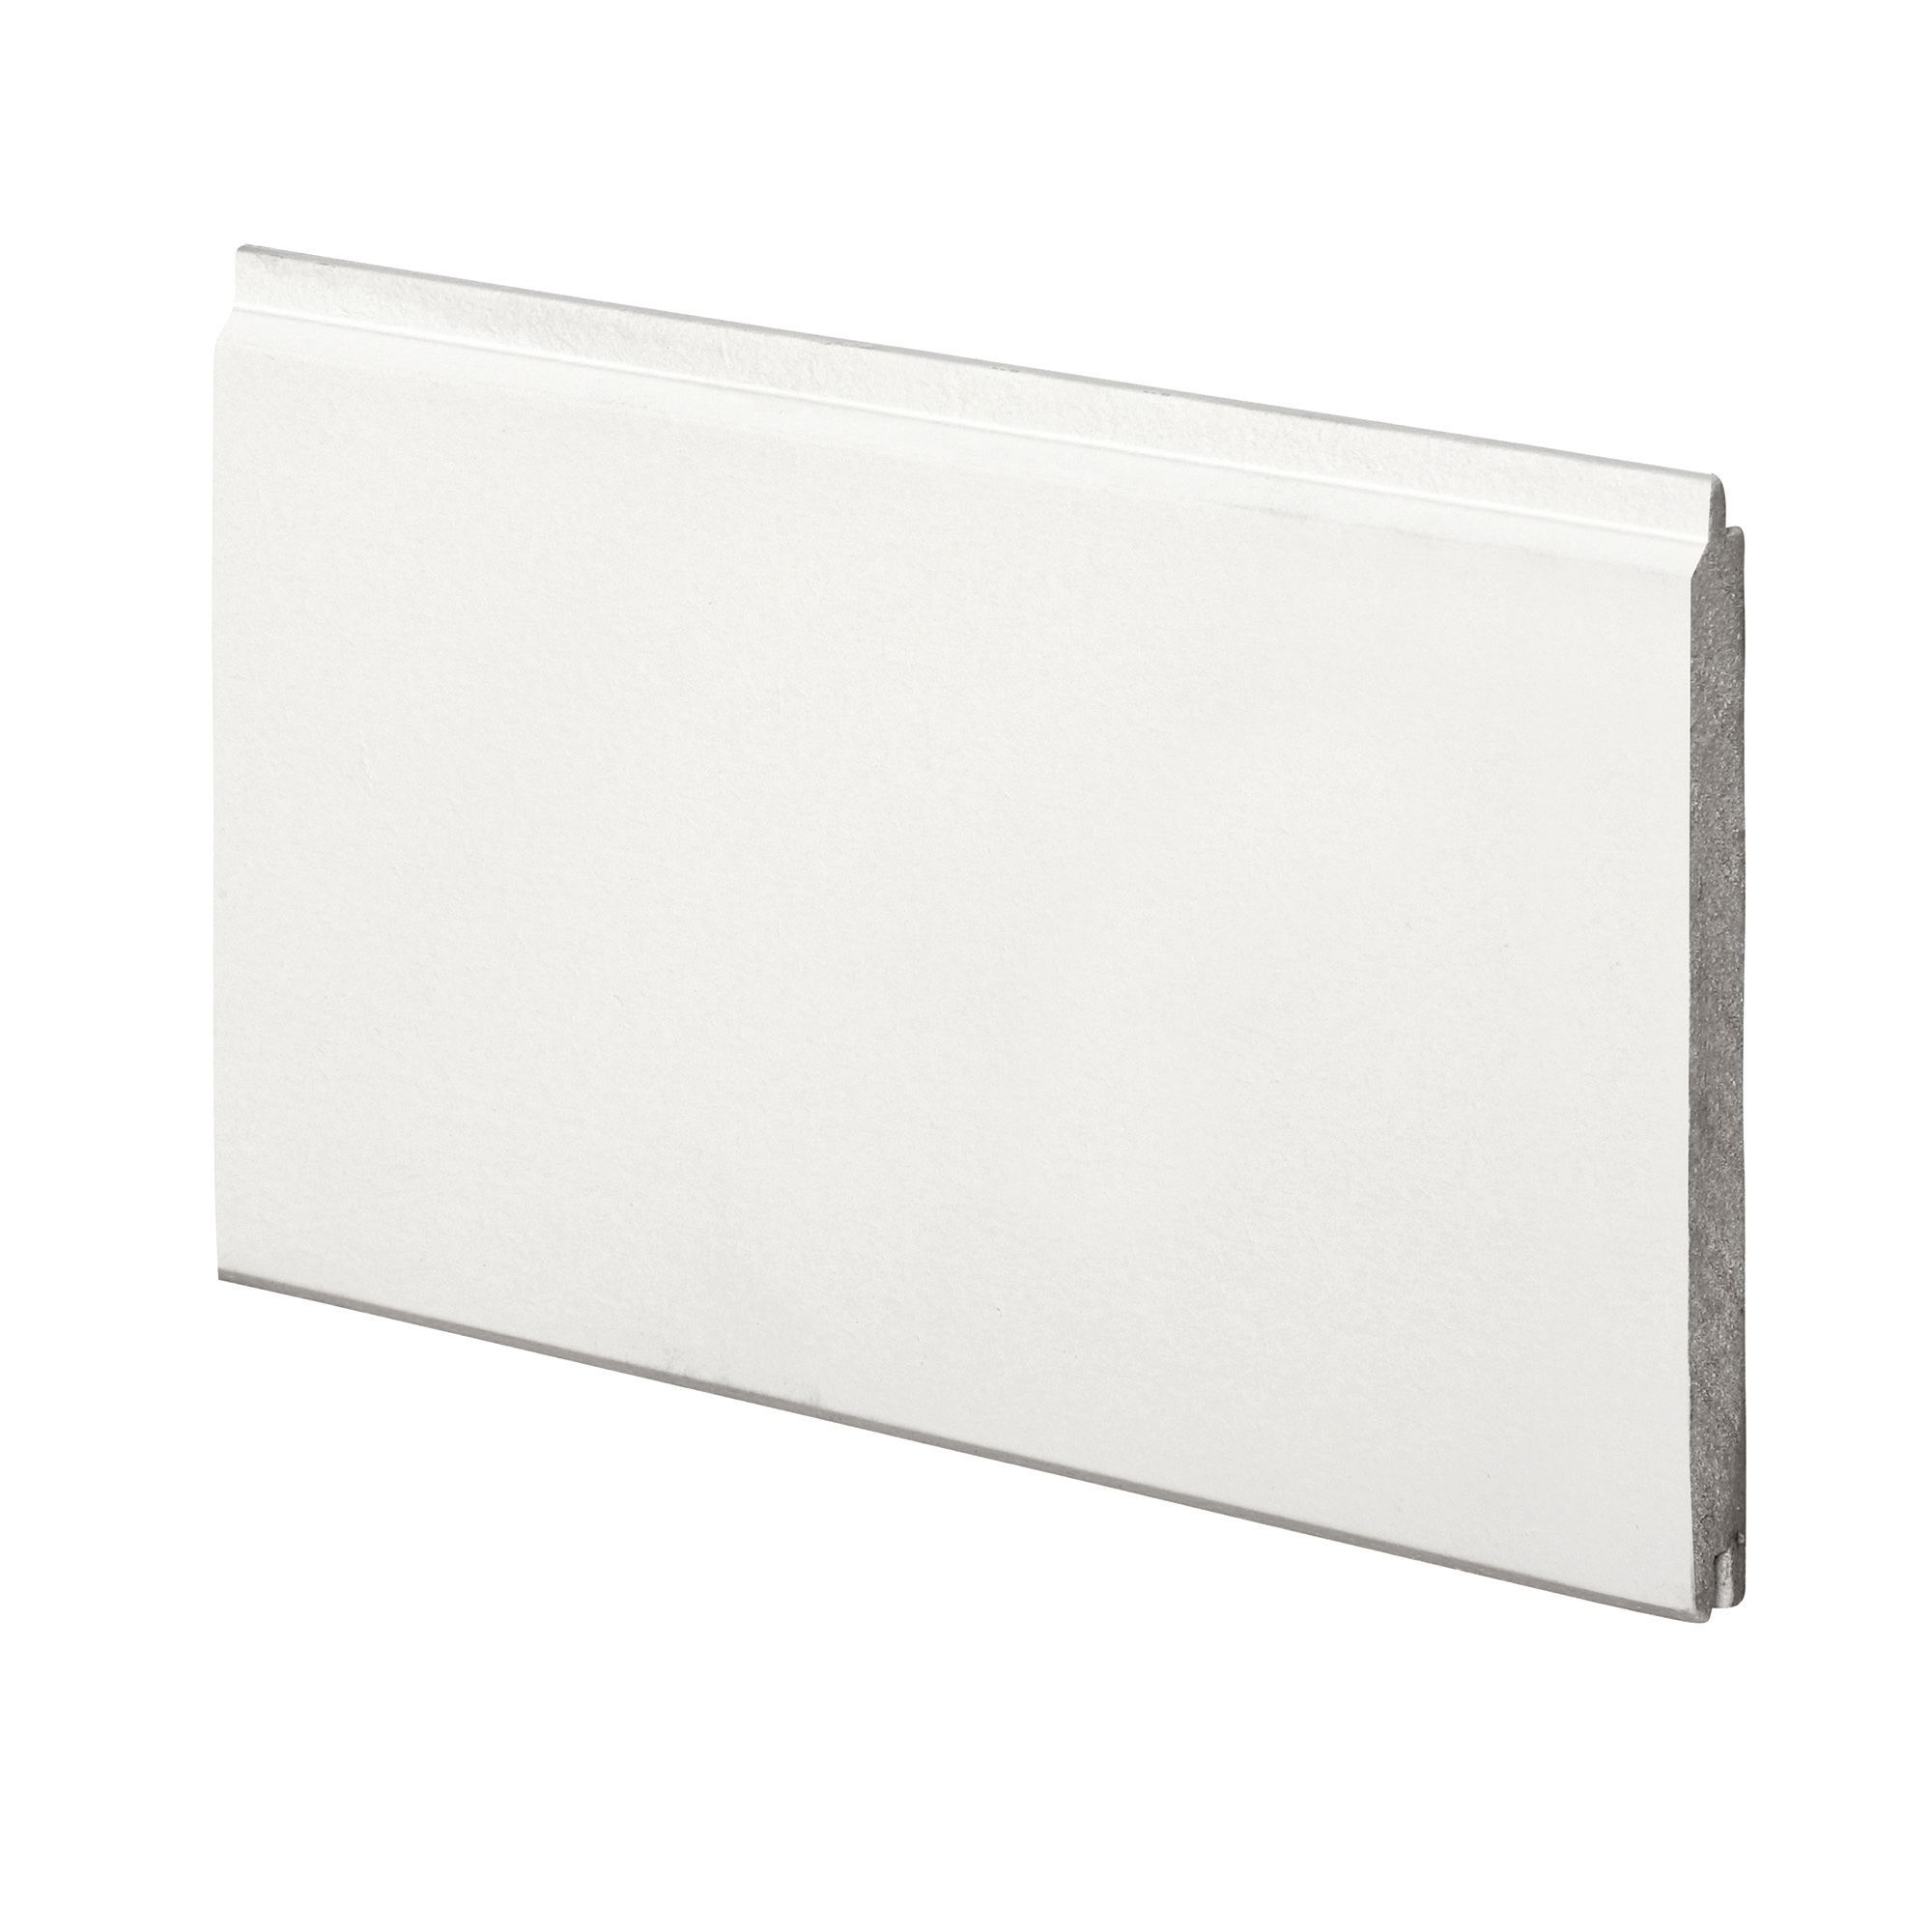 Image of Wickes V-jointed Primed MDF Cladding - 12mm x 94mm x 900mm Pack of 9